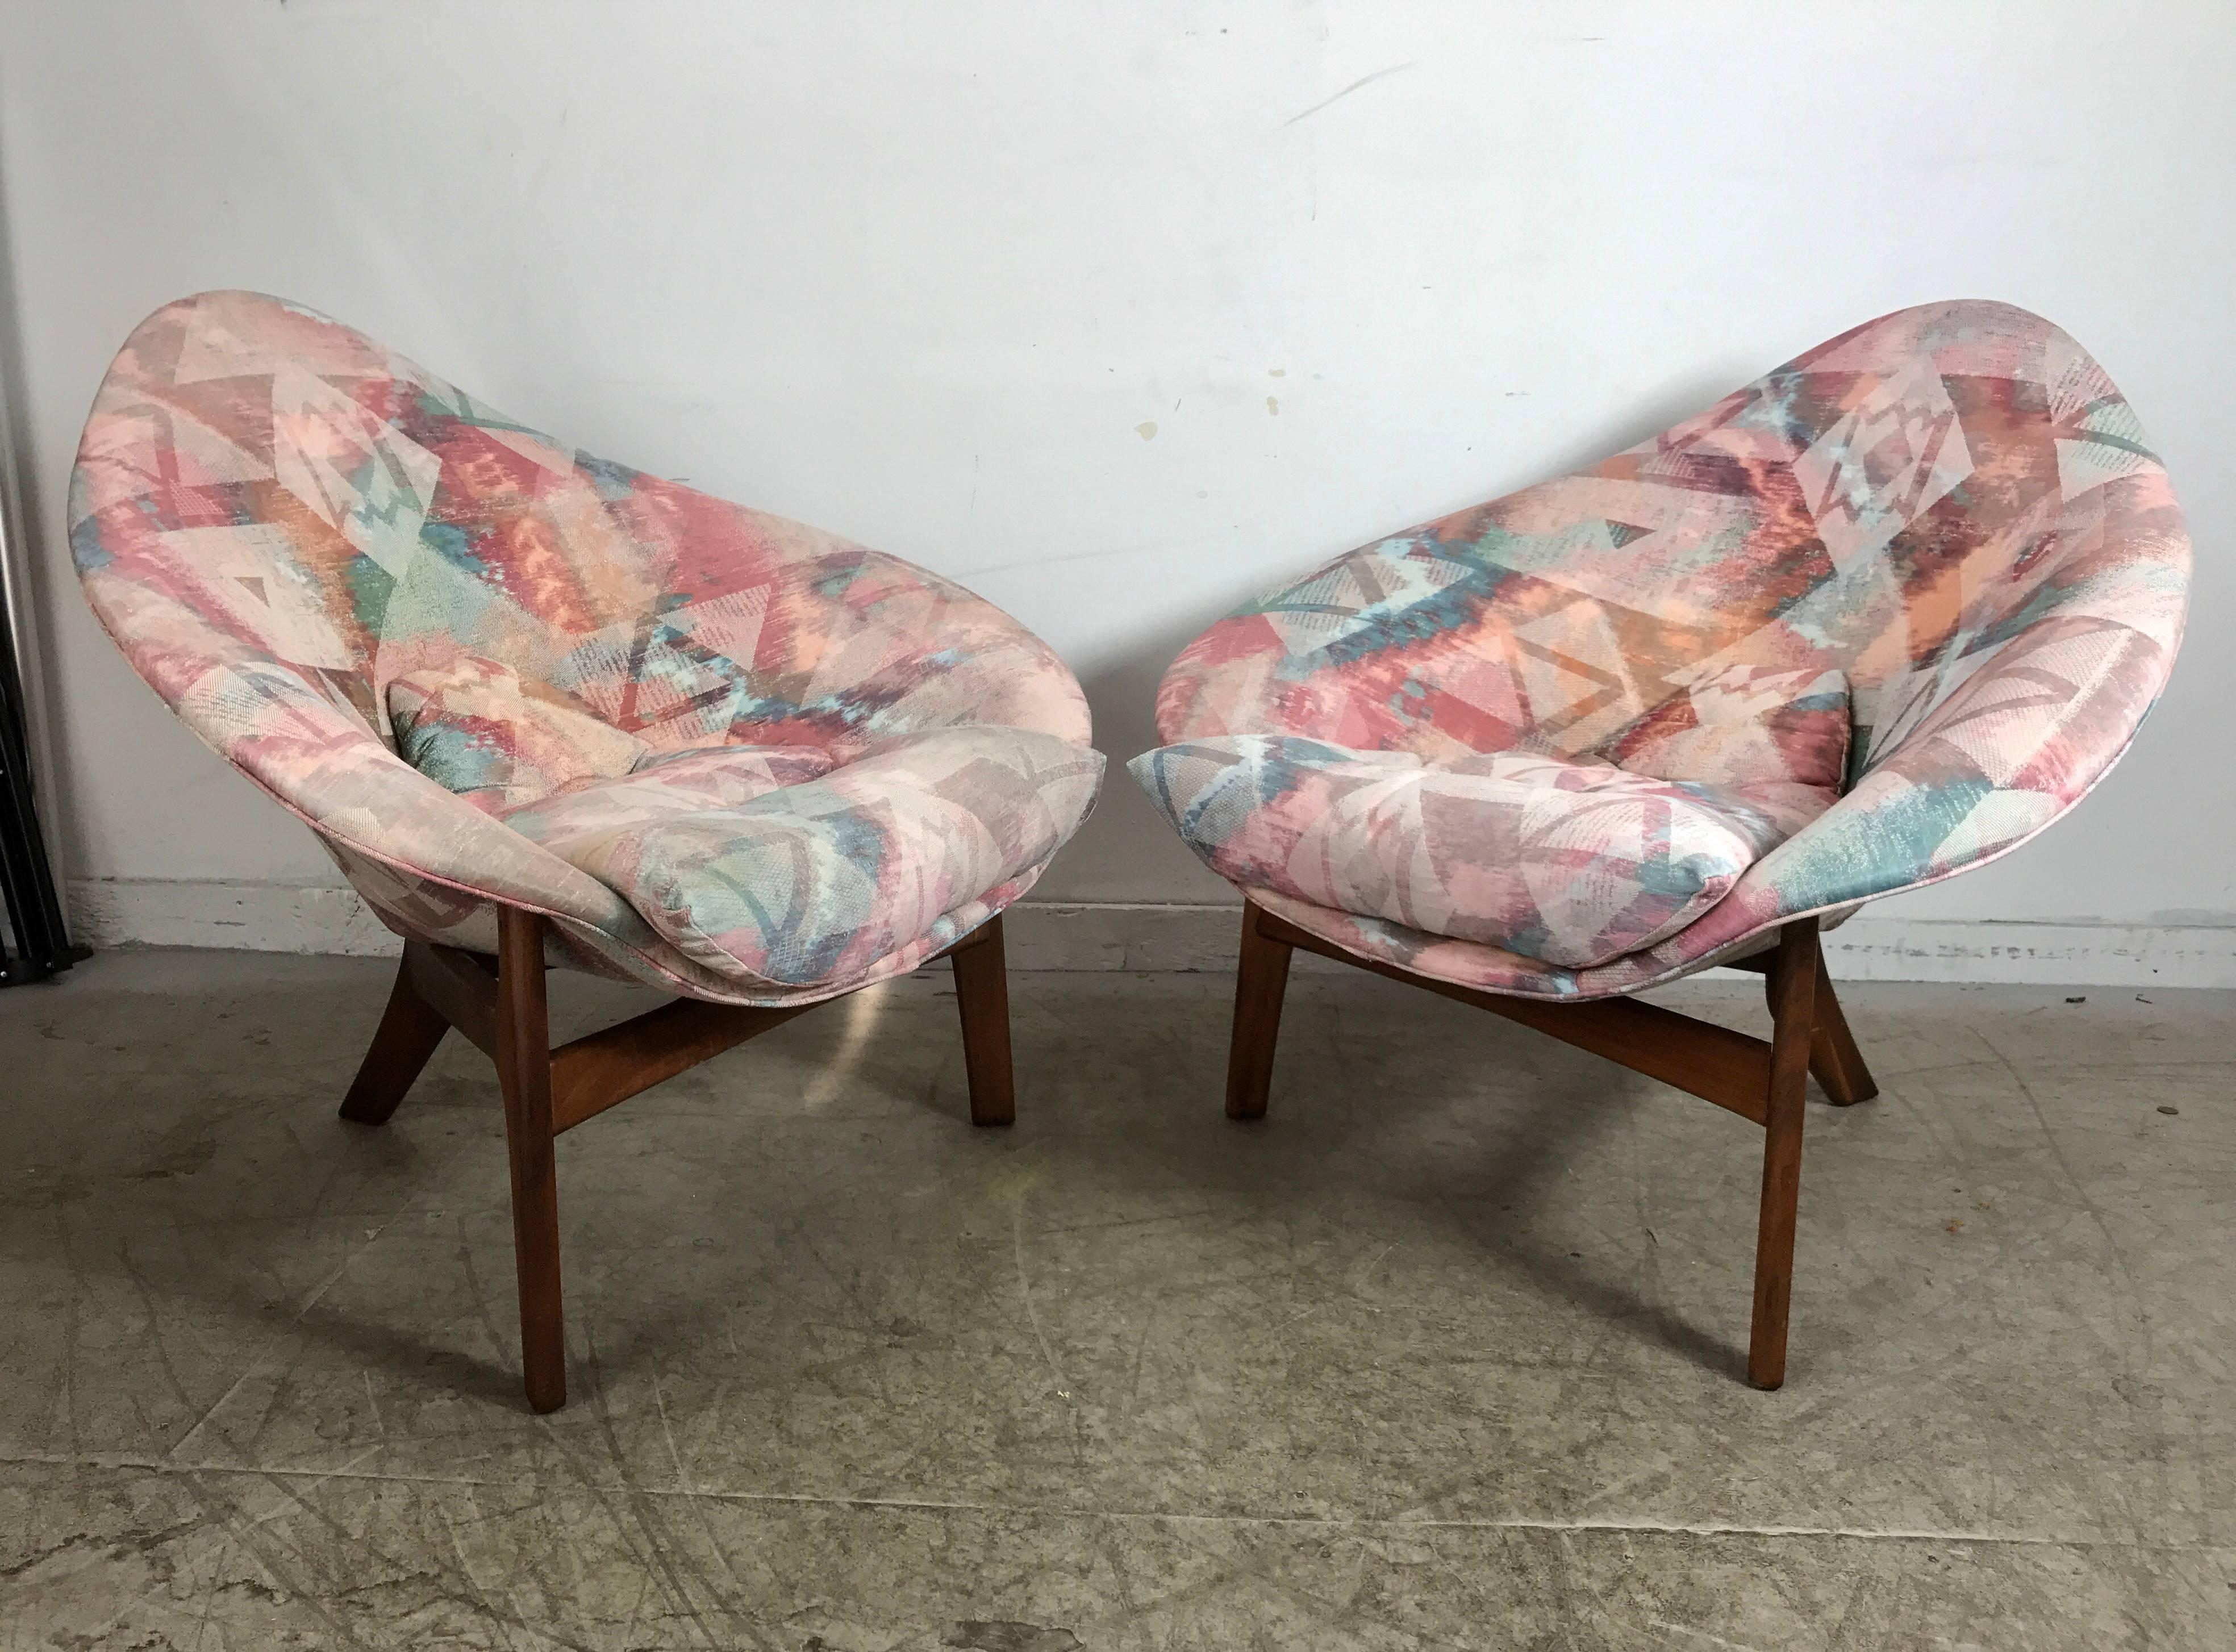 Pair of Mid-Century Modern Sculptural Walnut Lounge Chairs by Adrian Pearsall For Sale 2